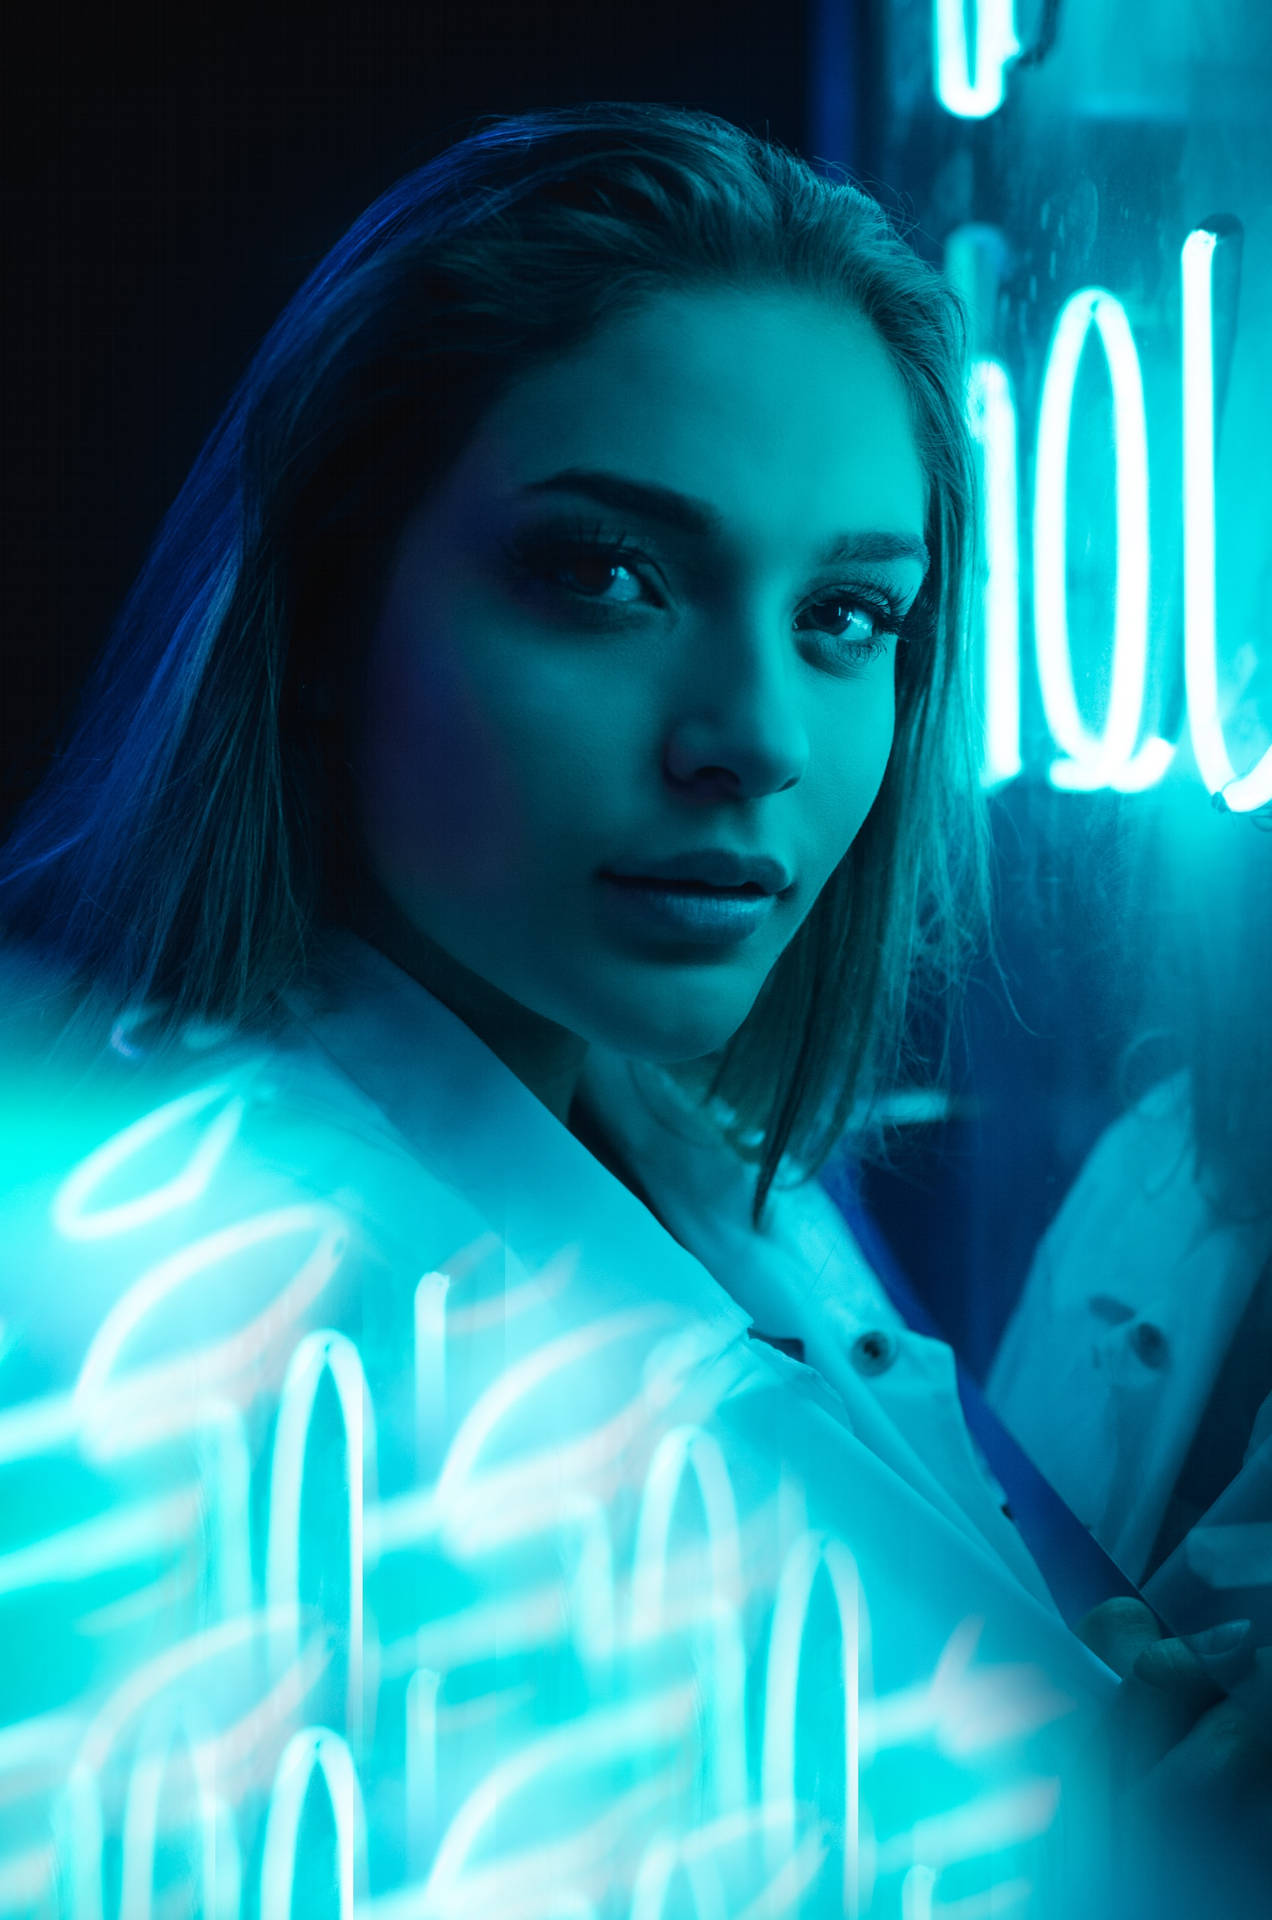 Woman With Glowing Neon Blue Iphone Wallpaper